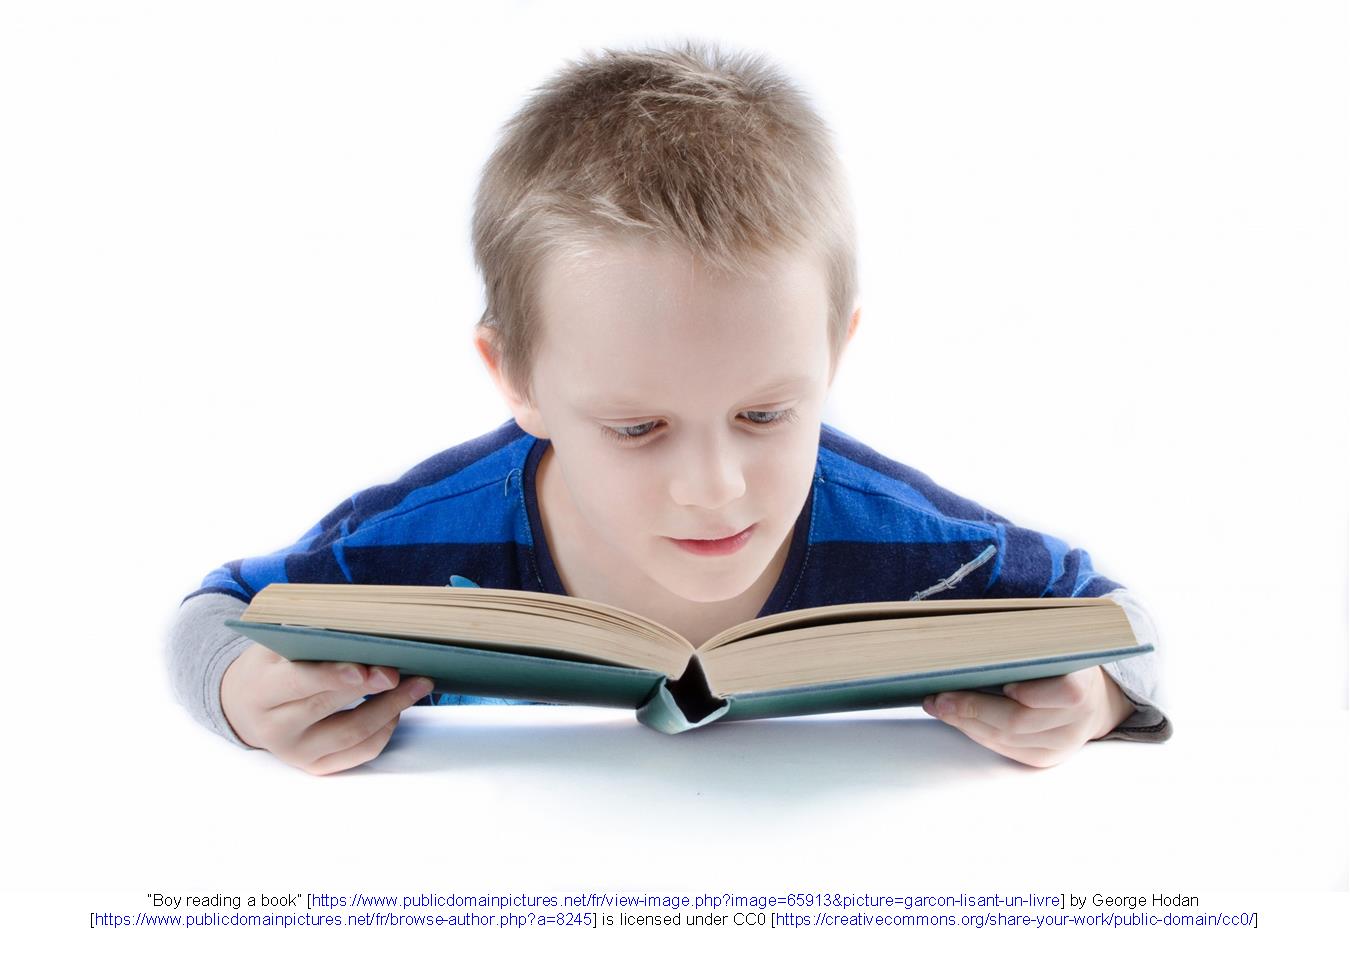 Child looking at book